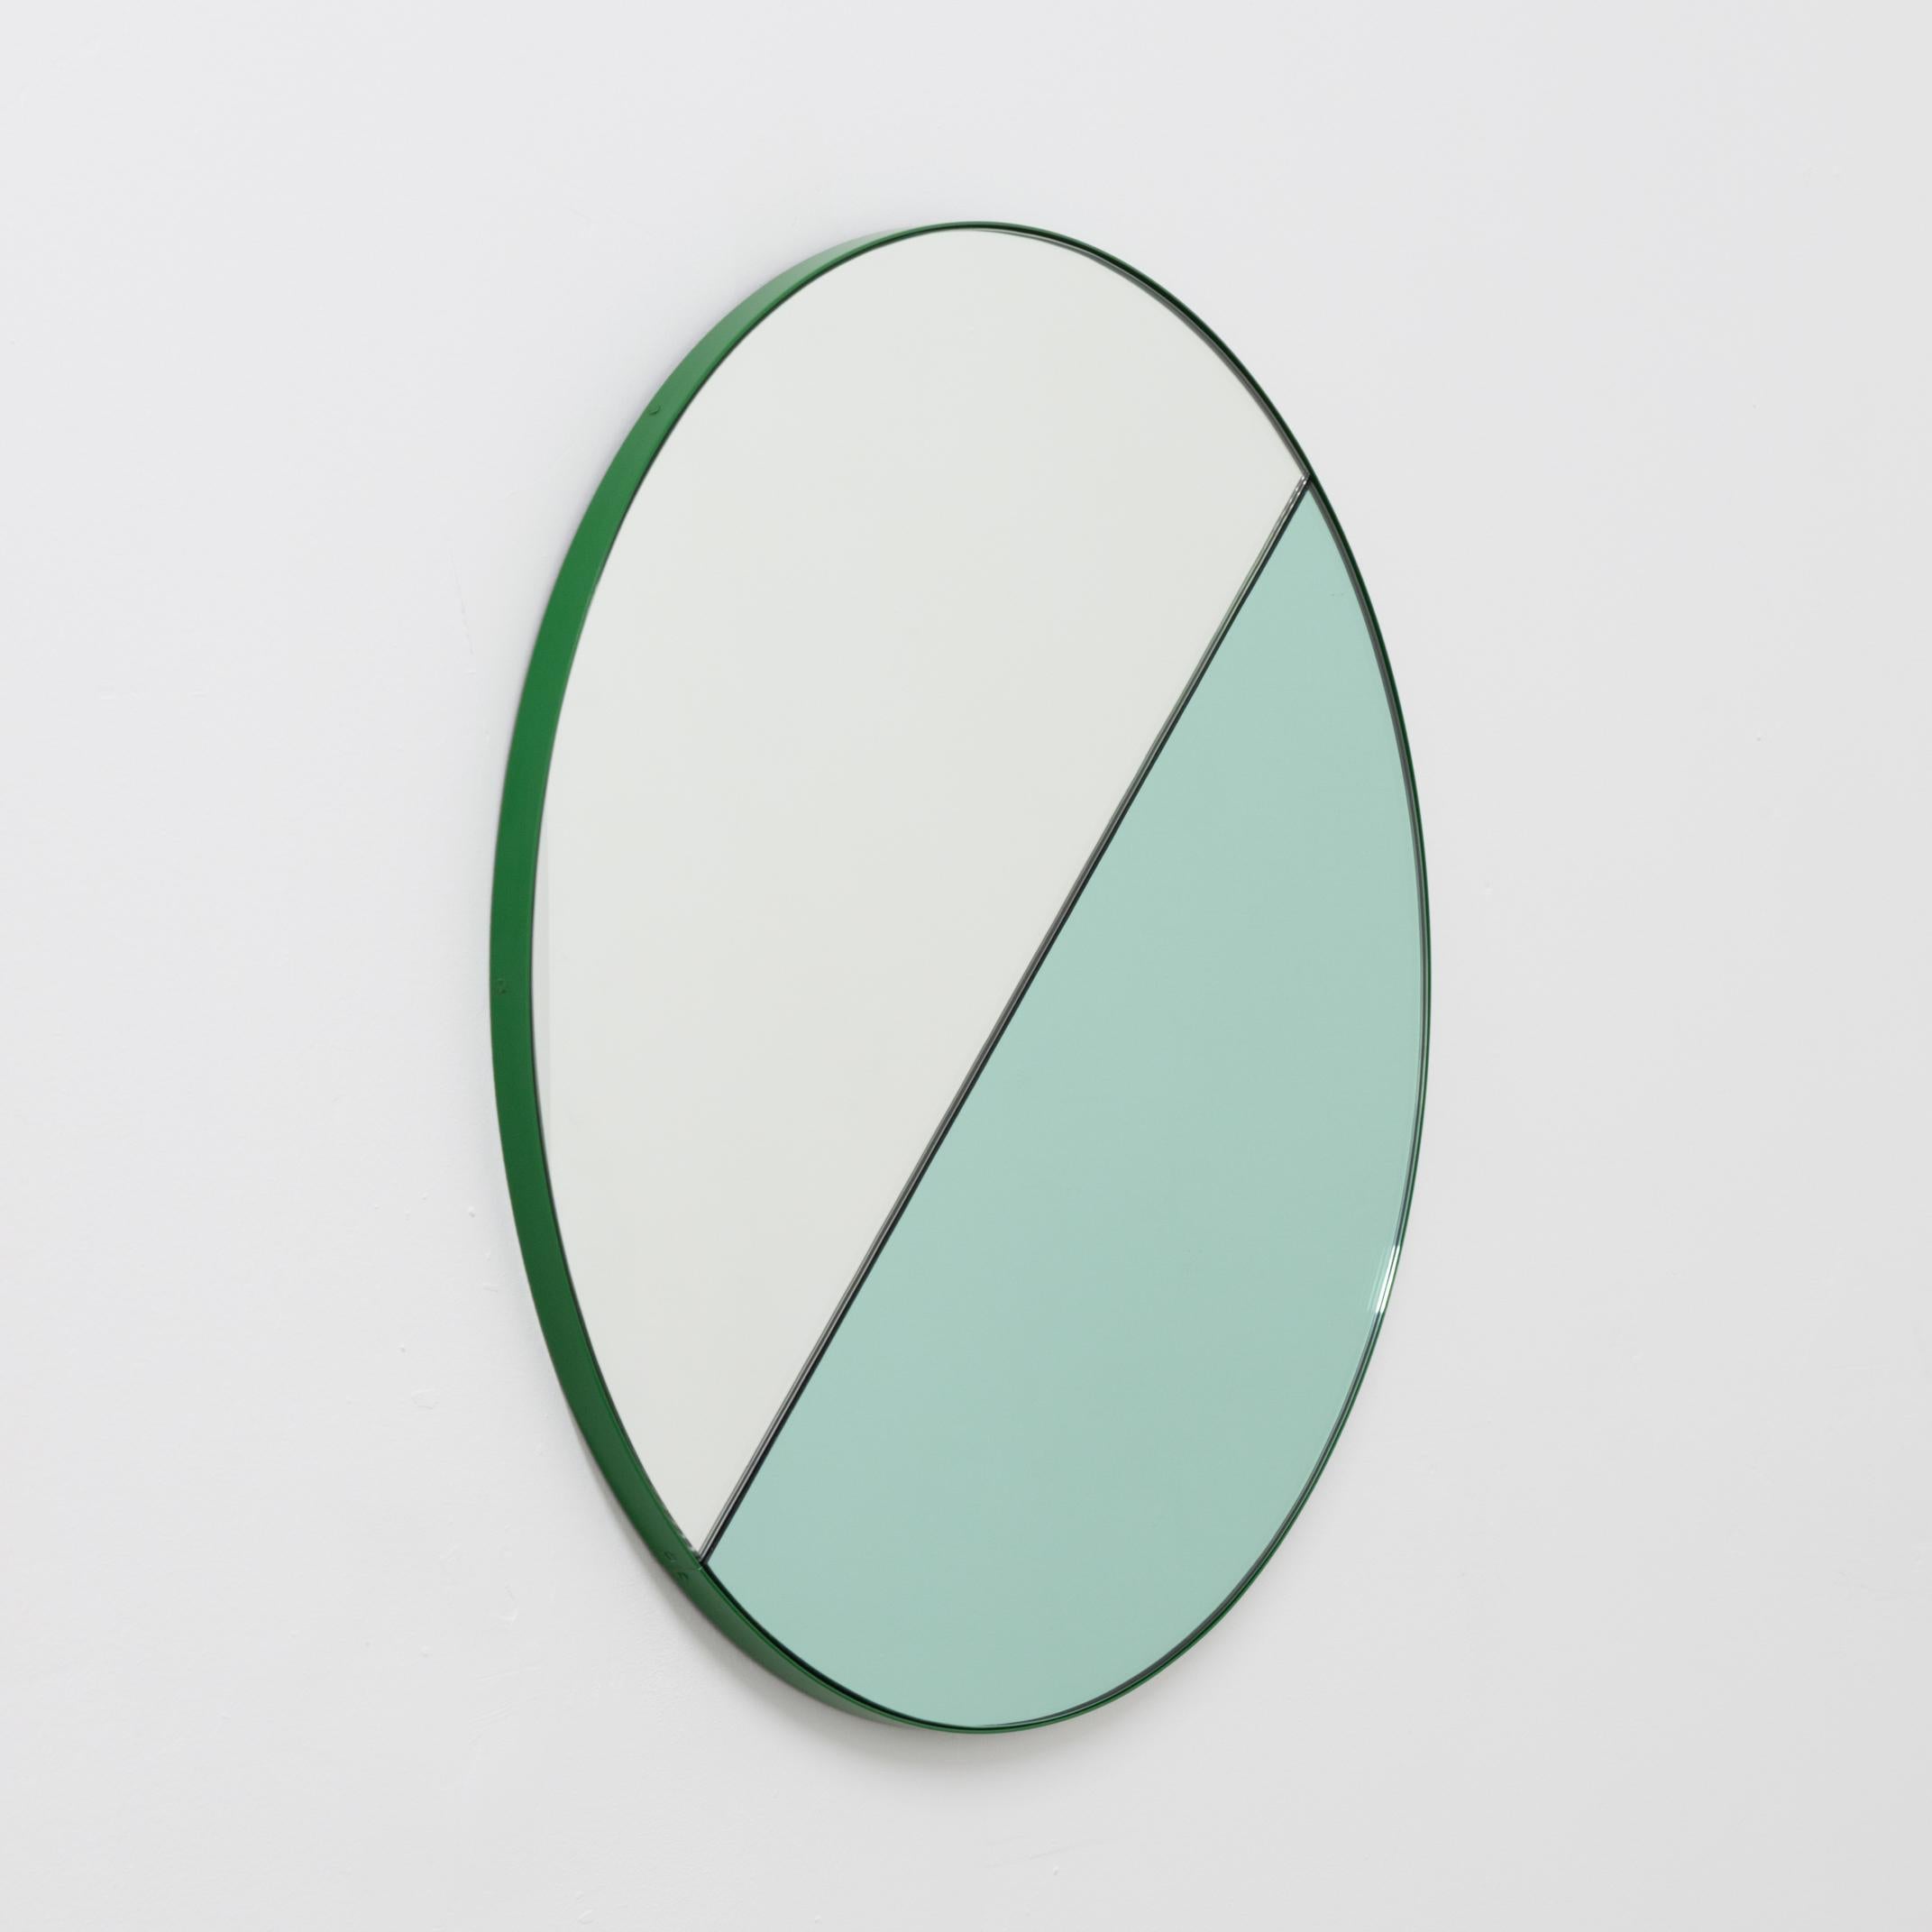 Delightful handcrafted mixed tinted (silver & green) Orbis Dualis mirror with a modern green frame. Designed and handcrafted in London, UK. The detailing and finish, including visible screws, emphasise the craft and quality feel of the mirror, a